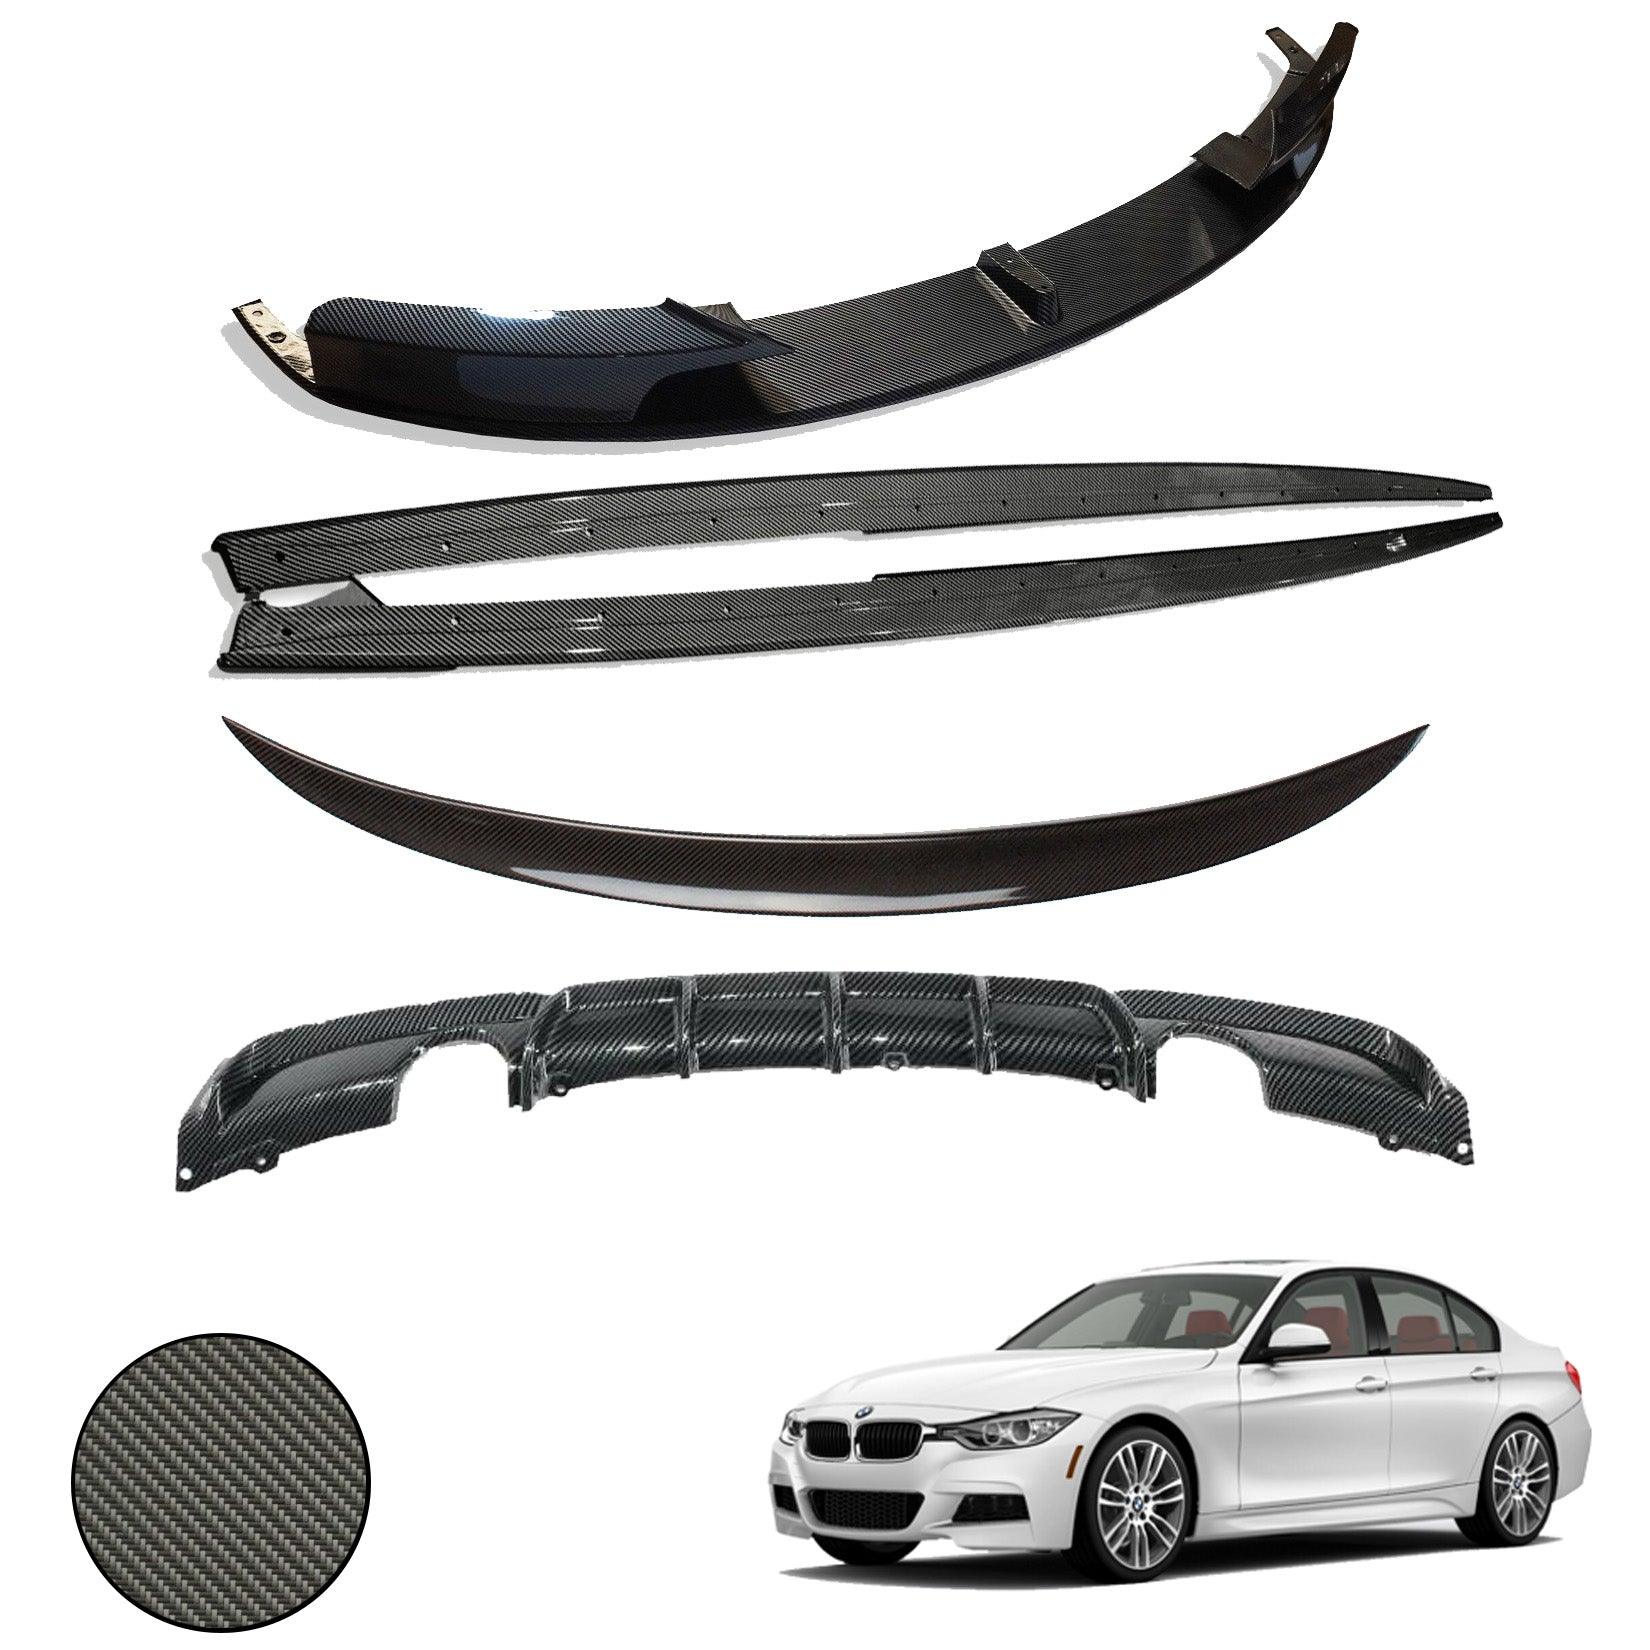 BMW 3 SERIES F30 2012-2018 FULL AERO BODY KIT IN CARBON LOOK - DIFFUSER 0___0 - RisperStyling